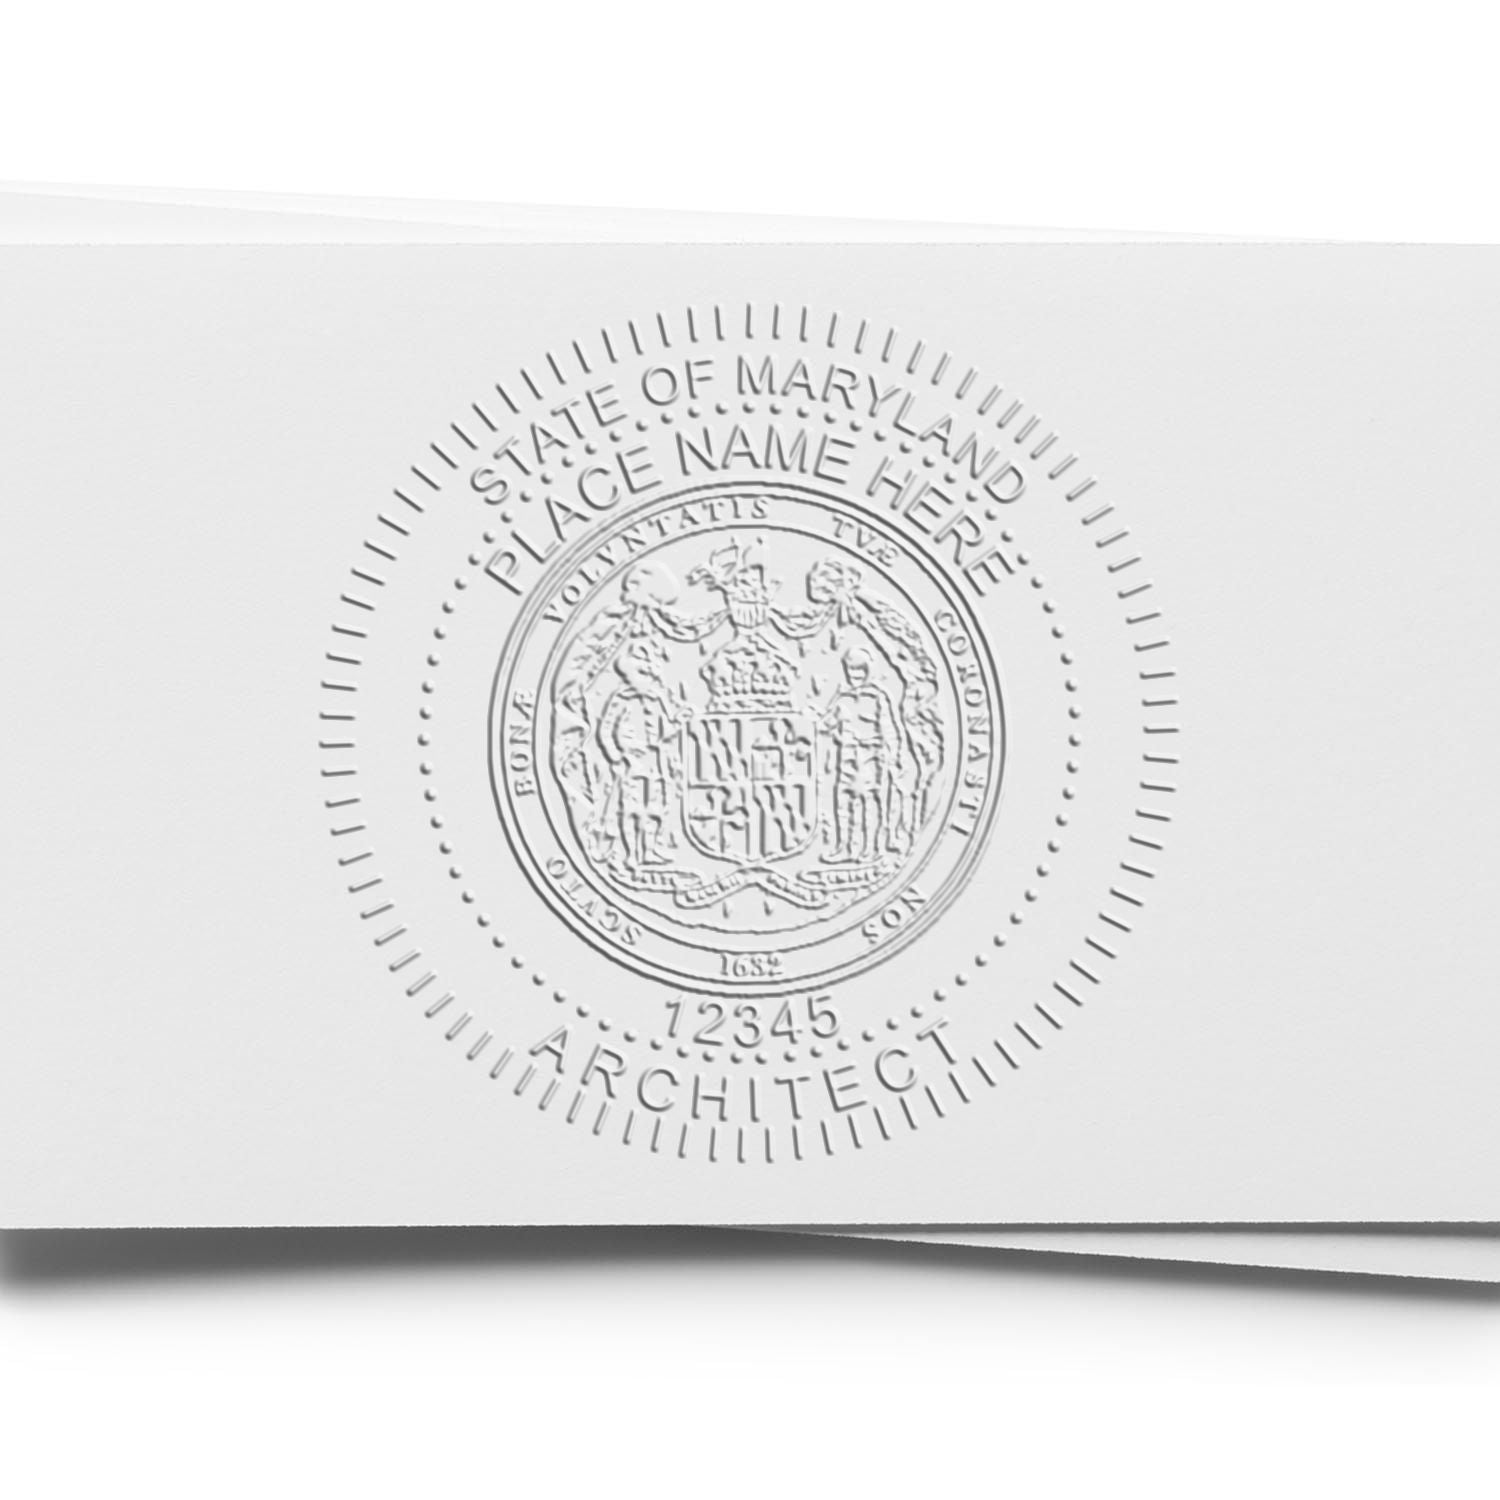 An in use photo of the Hybrid Maryland Architect Seal showing a sample imprint on a cardstock